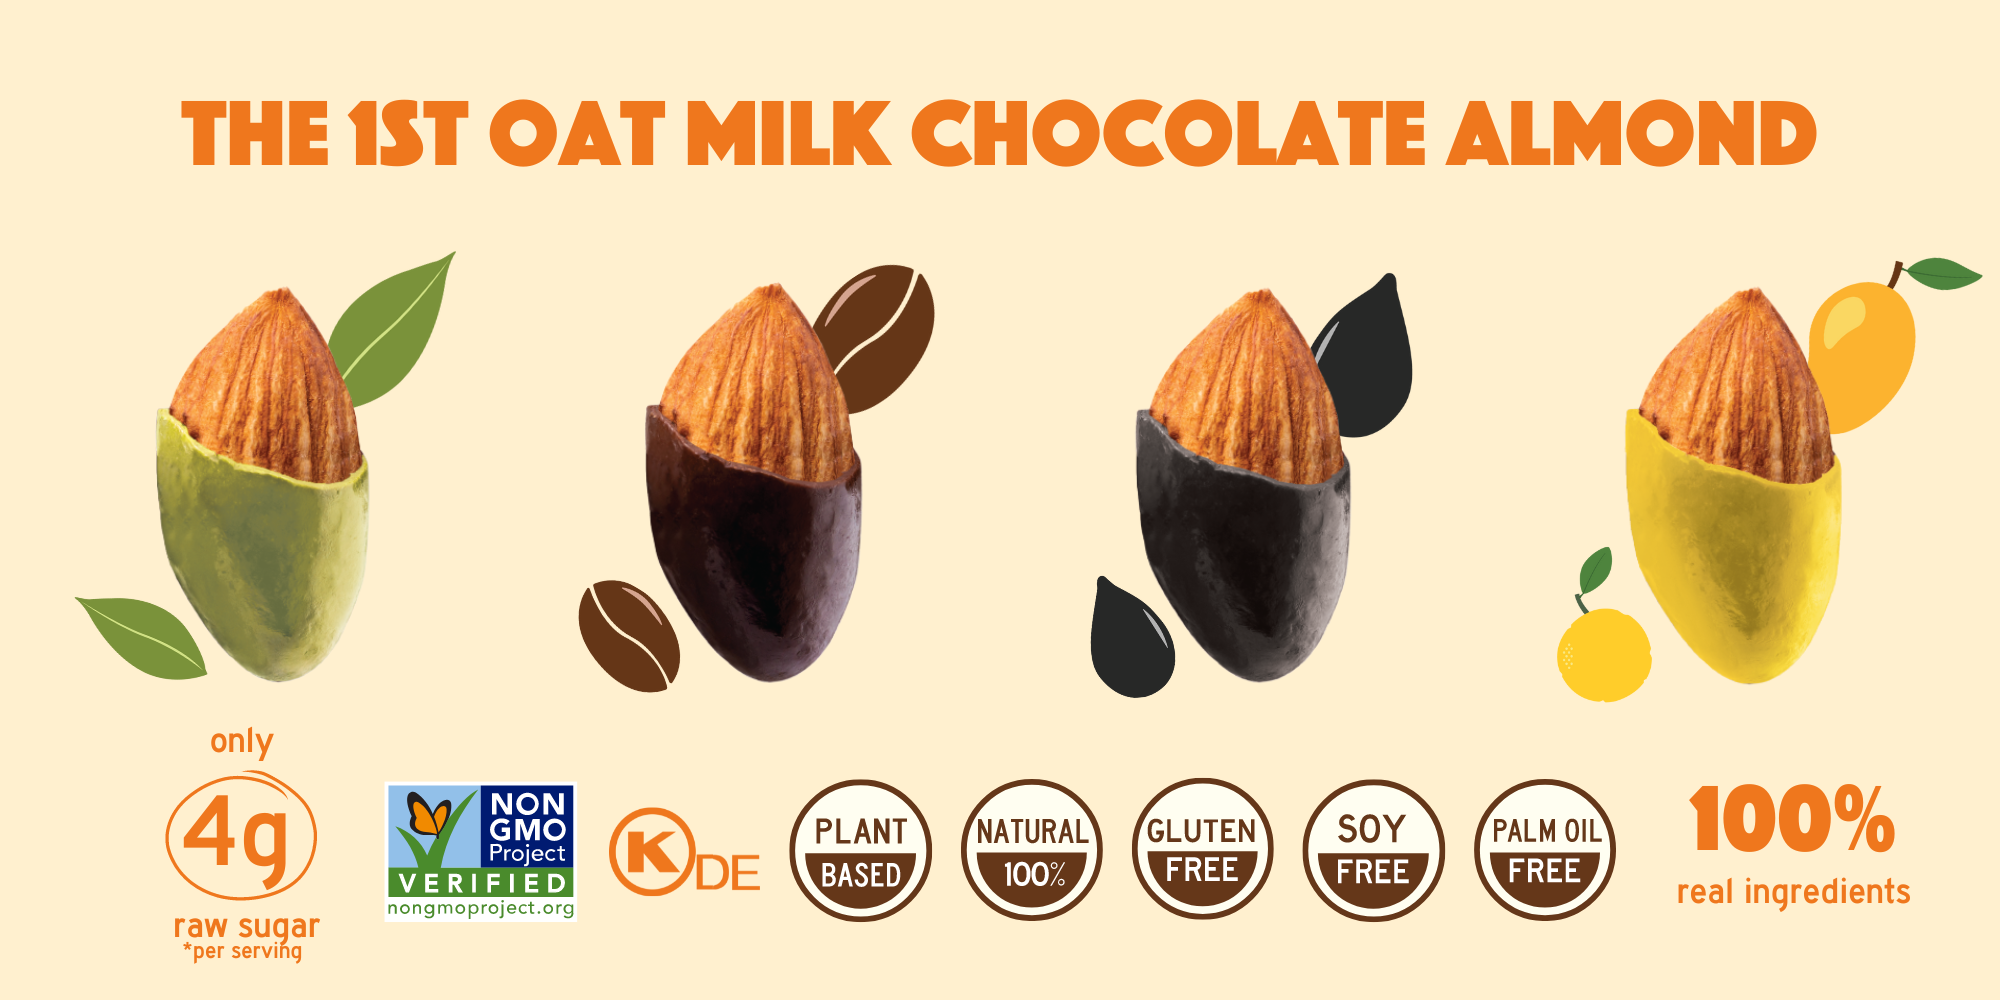 Chocolate Almond 4g raw sugar per serving, verified by nongmoproject.org. Plant-based, Gluten/Soy/Palm Oil Free. Made with 100% real ingredients.